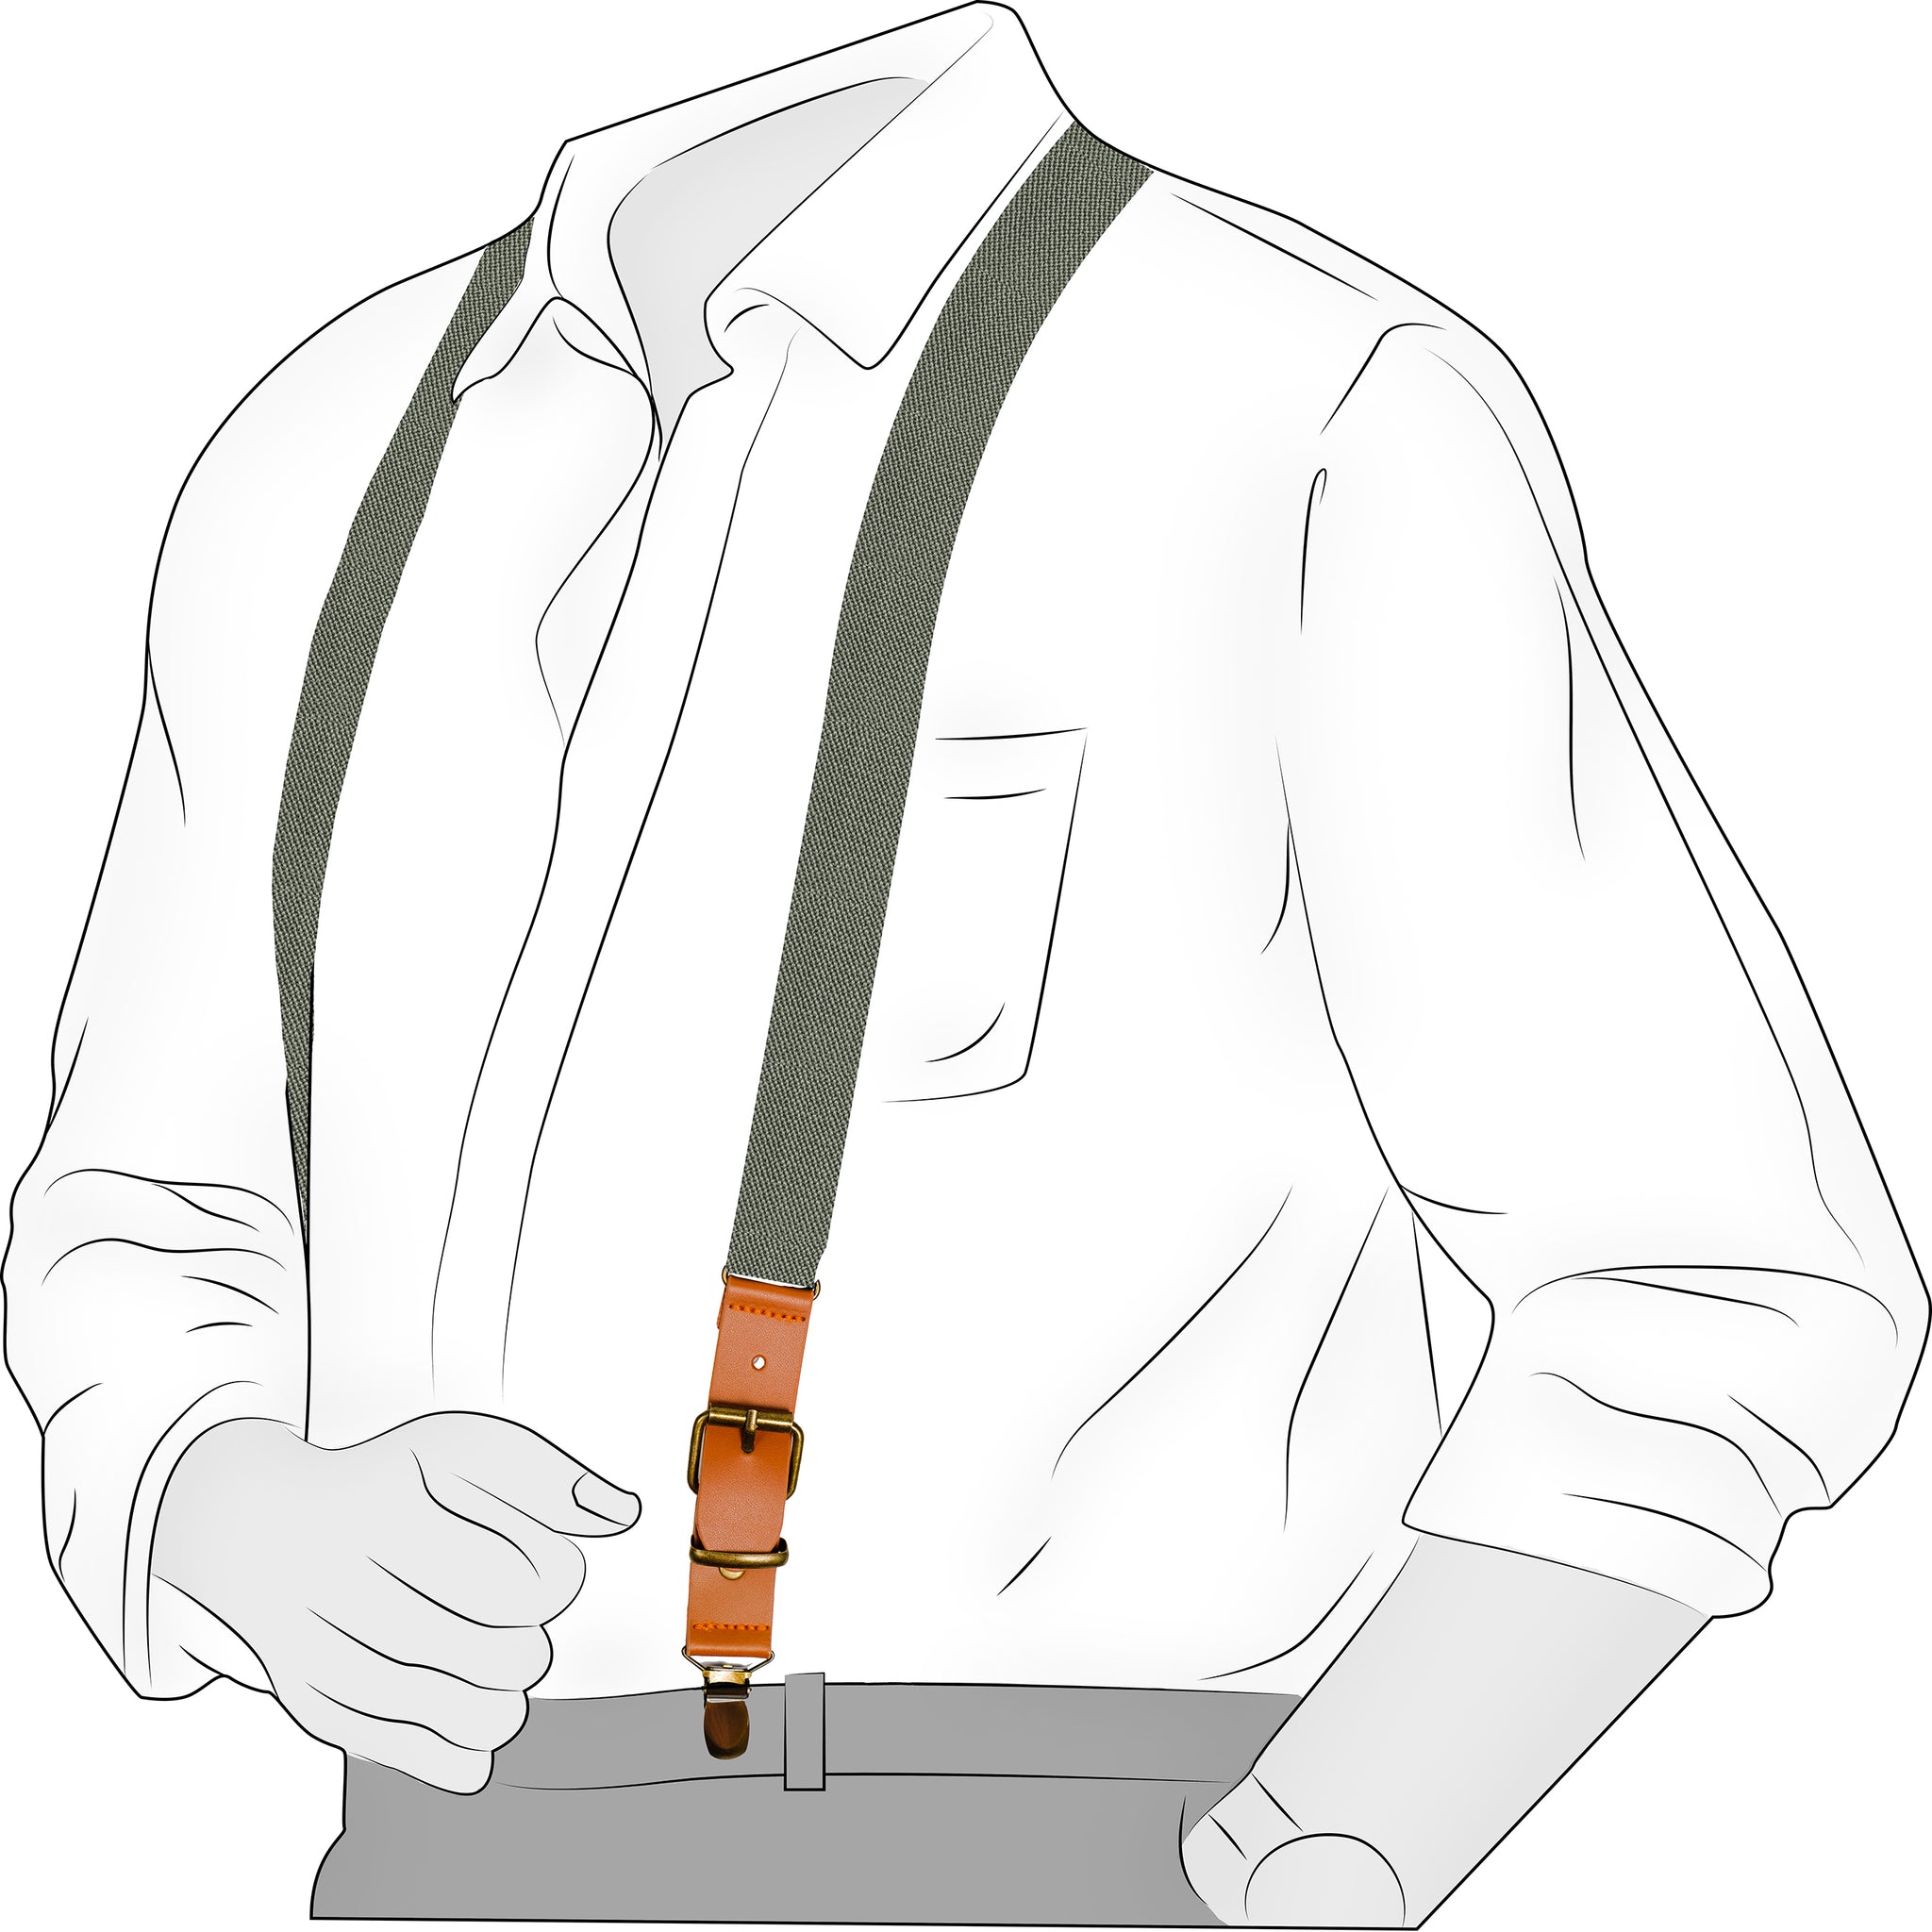 Chokore Y-shaped Suspenders with Leather detailing and adjustable Elastic Strap (Lichen)